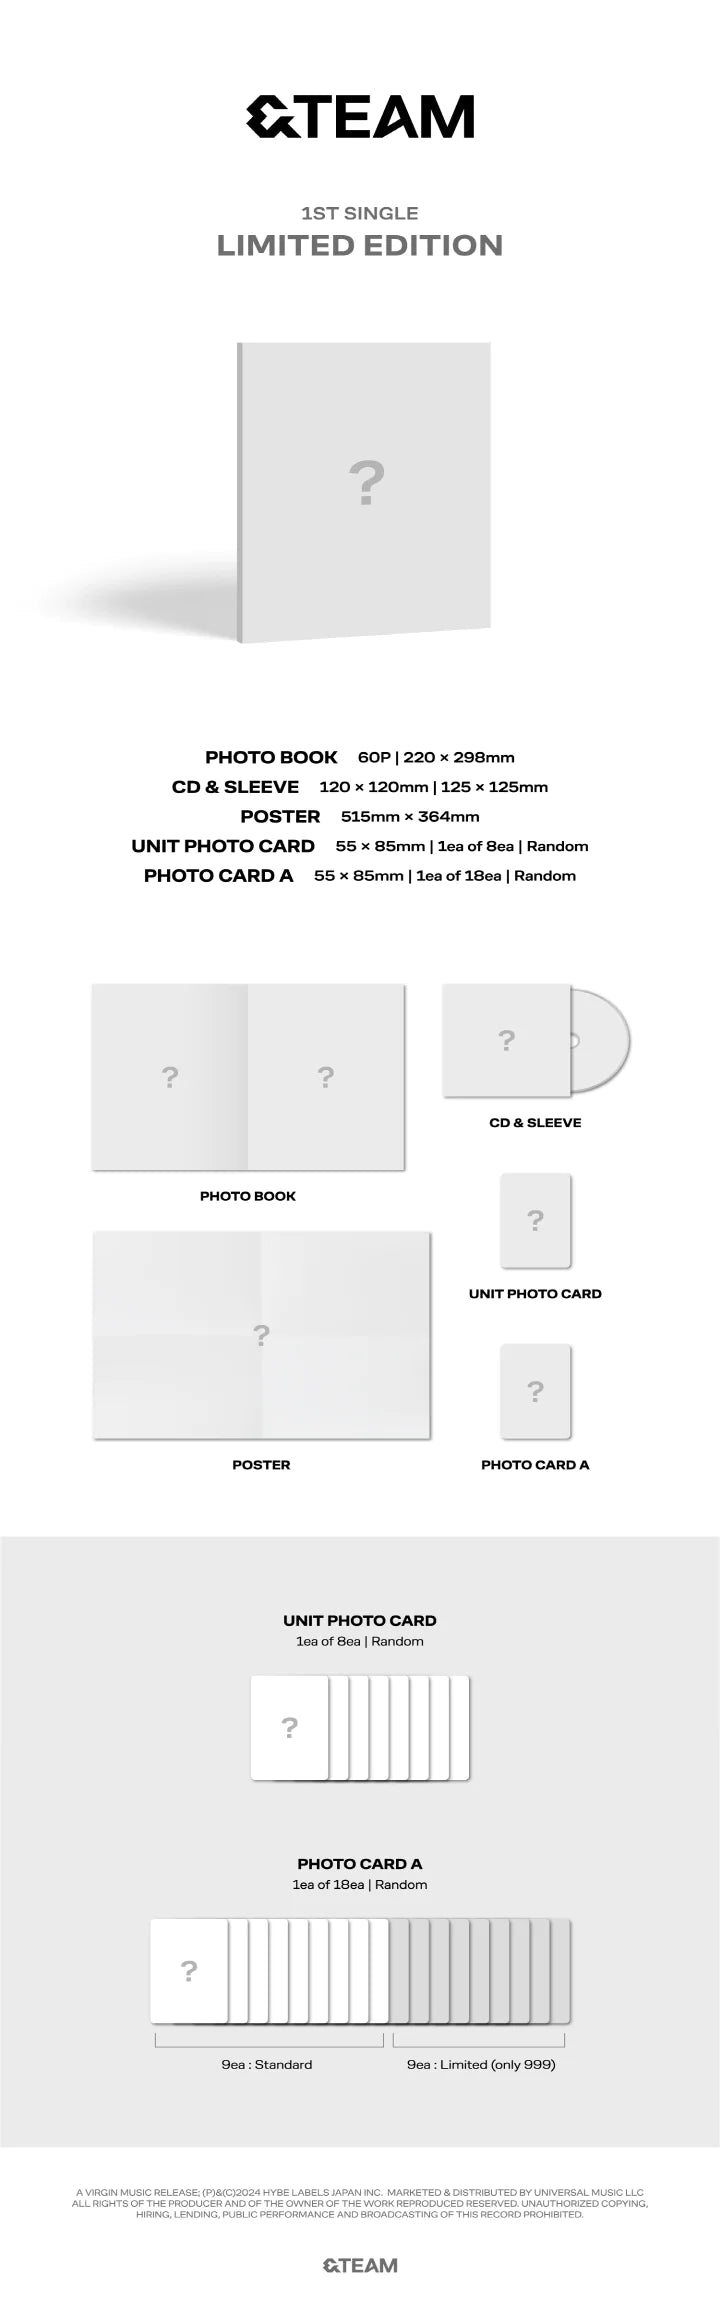 &TEAM - 1st Single Album (Limited Edition) Infographic